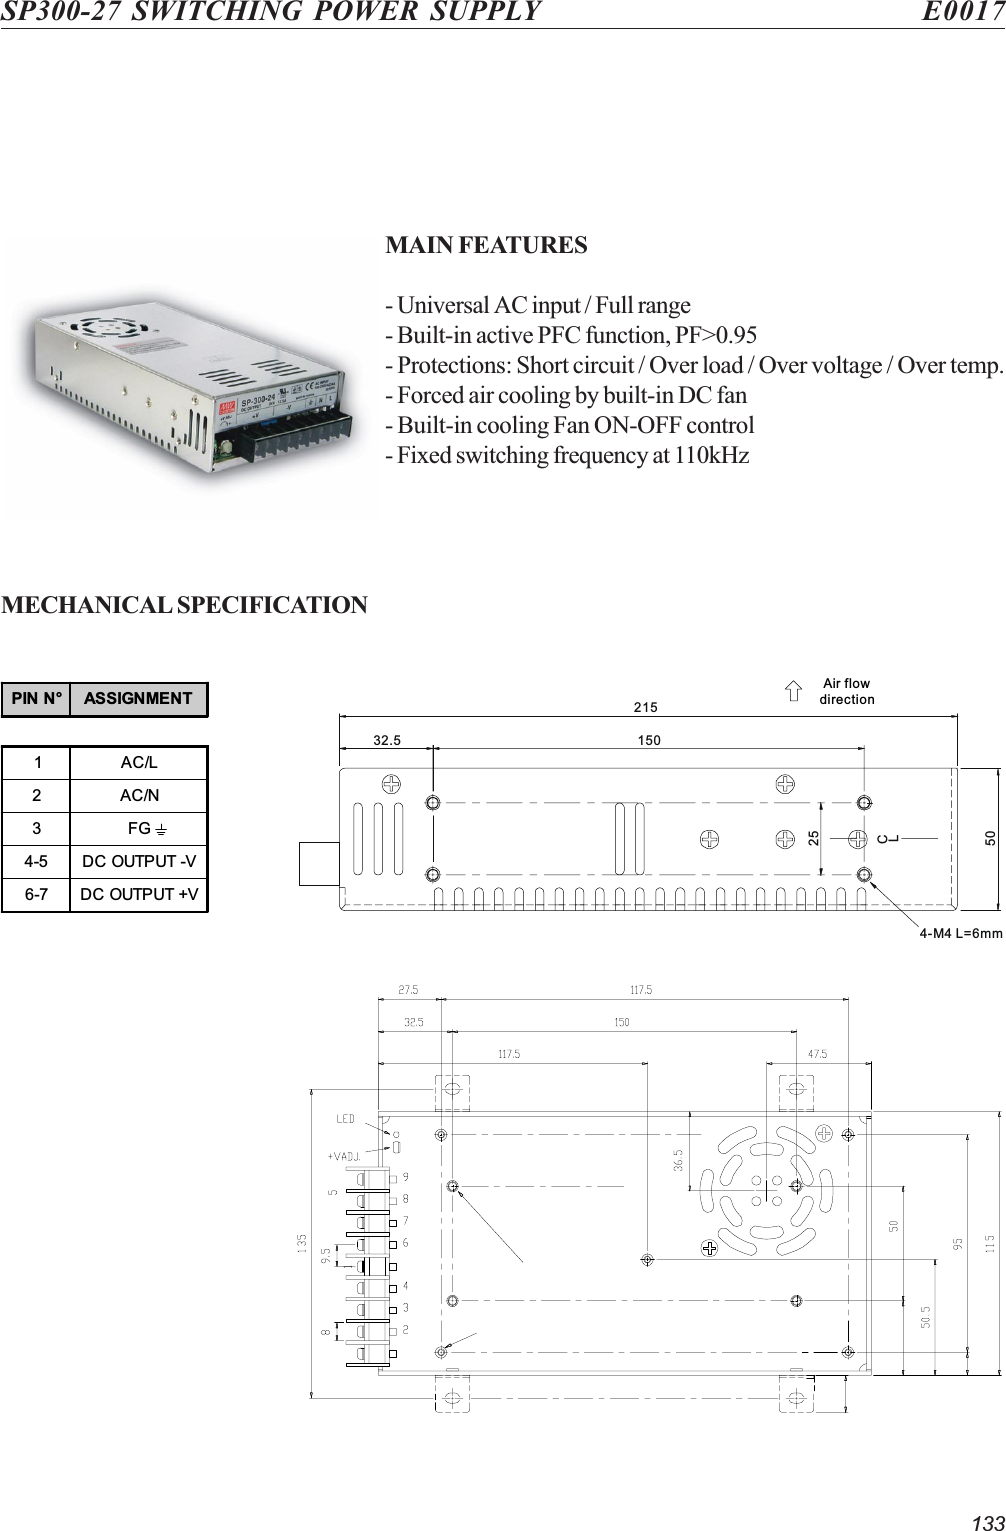 133SP300-27 SWITCHING POWER SUPPLY E0017MAIN FEATURES- Universal AC input / Full range- Built-in active PFC function, PF&gt;0.95- Protections: Short circuit / Over load / Over voltage / Over temp.- Forced air cooling by built-in DC fan- Built-in cooling Fan ON-OFF control- Fixed switching frequency at 110kHzMECHANICAL SPECIFICATIONAir flowdirection21532.550254-M4 L=6mm150CLPIN N° ASSIGNMENT1AC/L2AC/N3FG4-5 DC OUTPUT -V6-7 DC OUTPUT +V